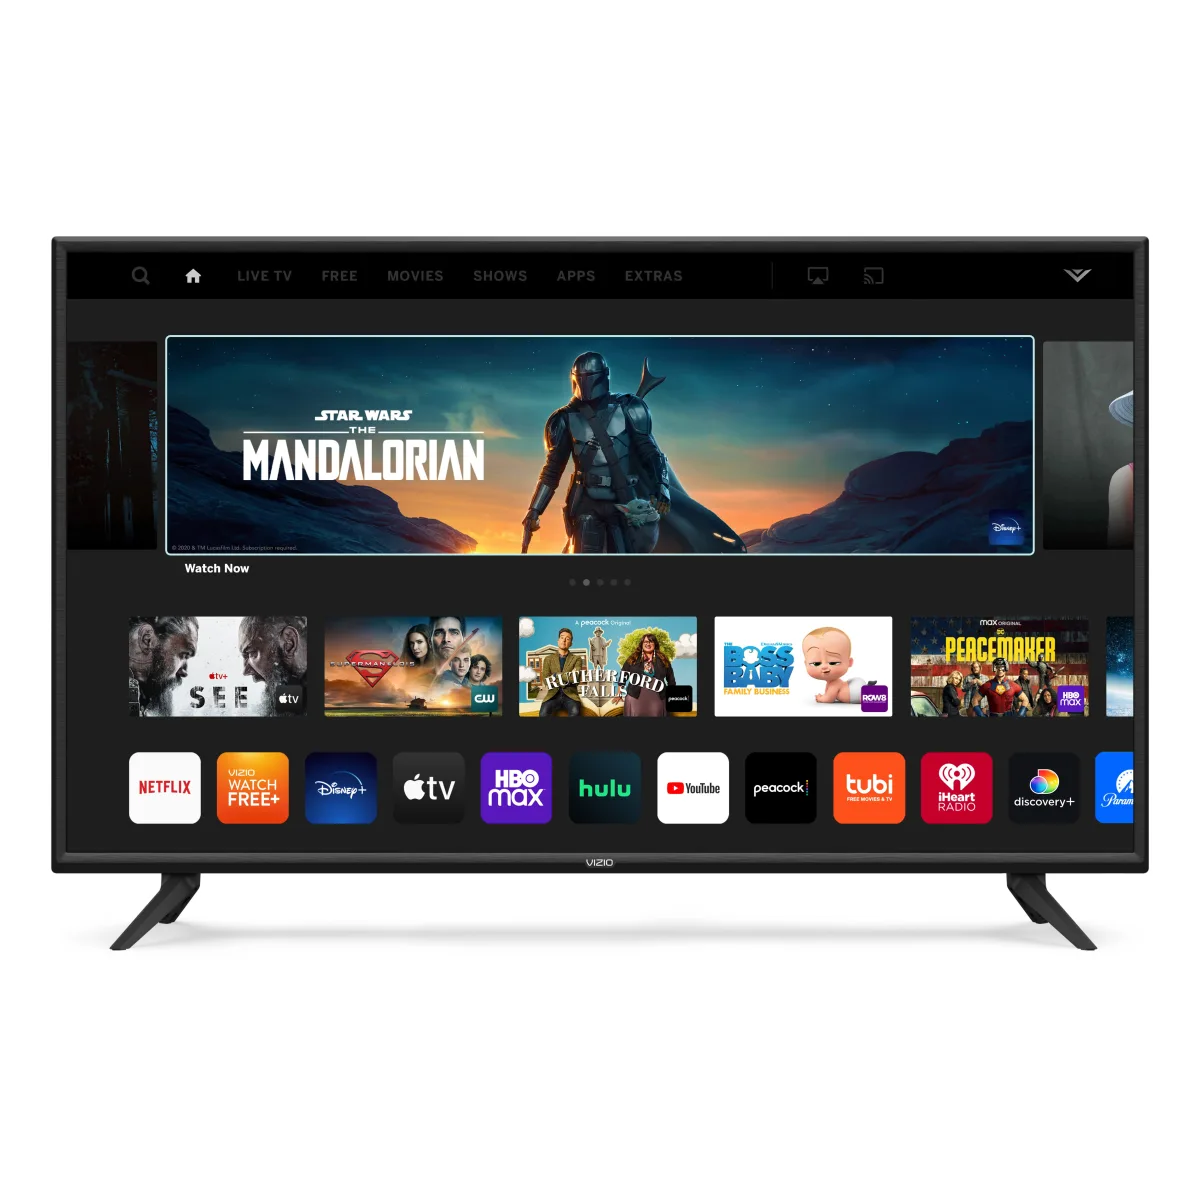 How Do I Connect My Phone to My TV Vizio?